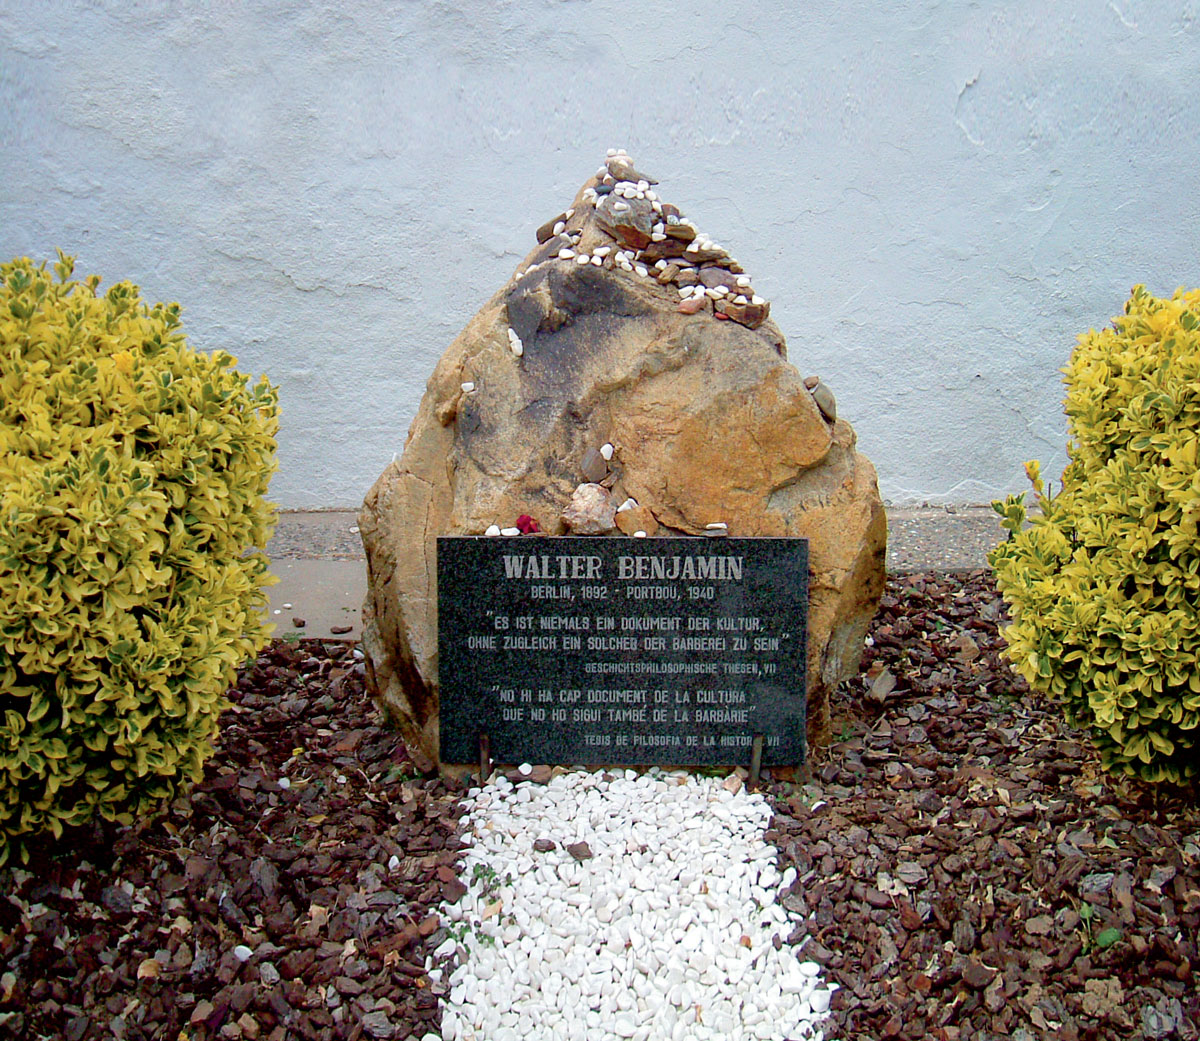 Walter Benjamin’s grave in Portbou, Catalonia, where he committed suicide in September 1940. The epitaph, in German and in Catalan, is from Benjamin’s “Theses on the Philosophy of History”: “There is no document of civilization which is not at the same time a document of barbarism.”